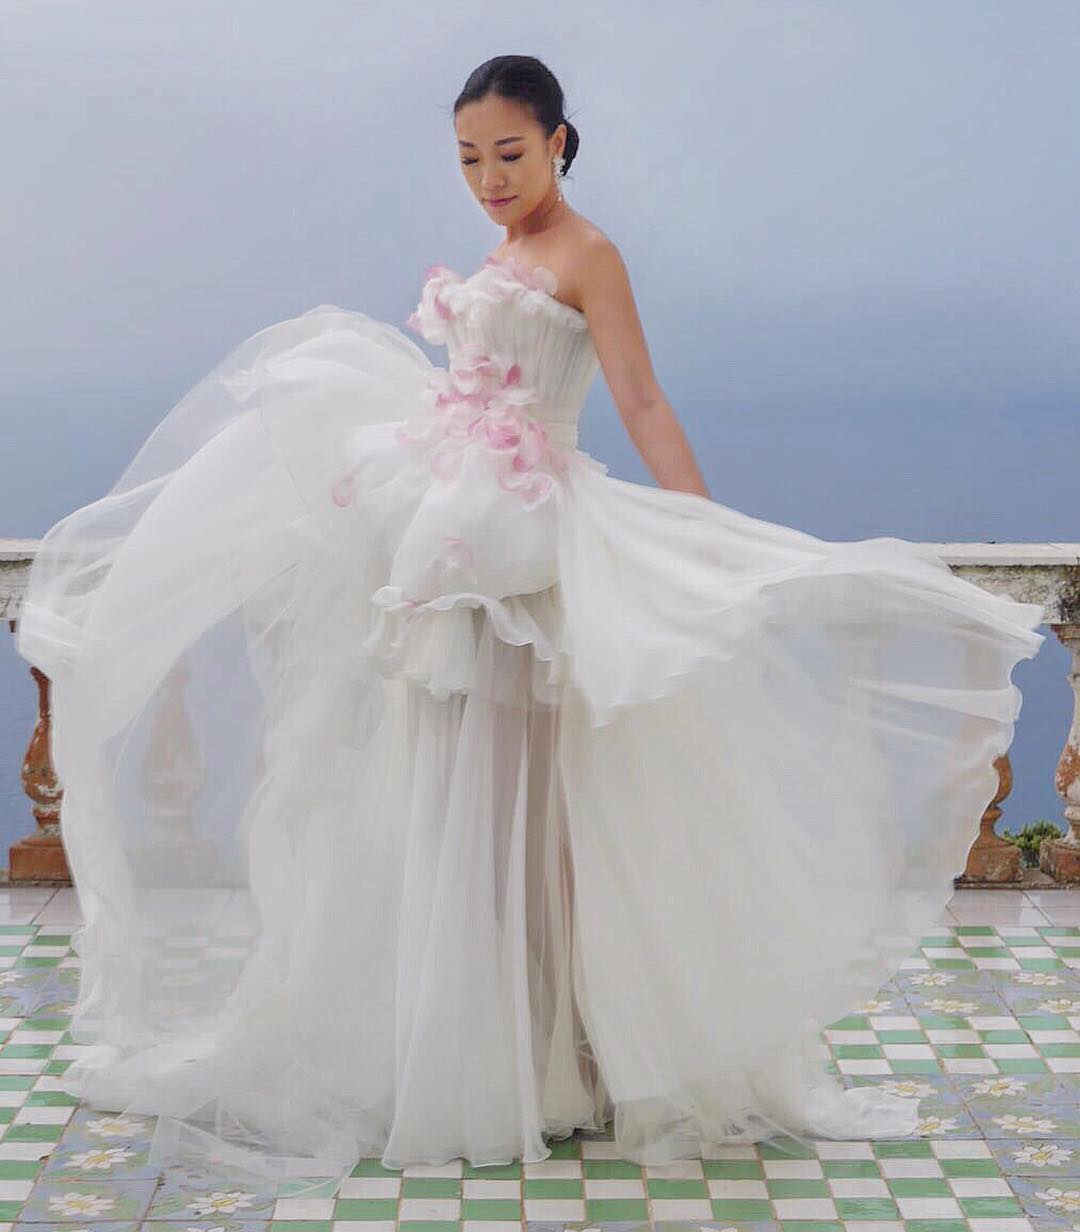 Feiping Chang in the  Giambattista Valli Couture wedding dress